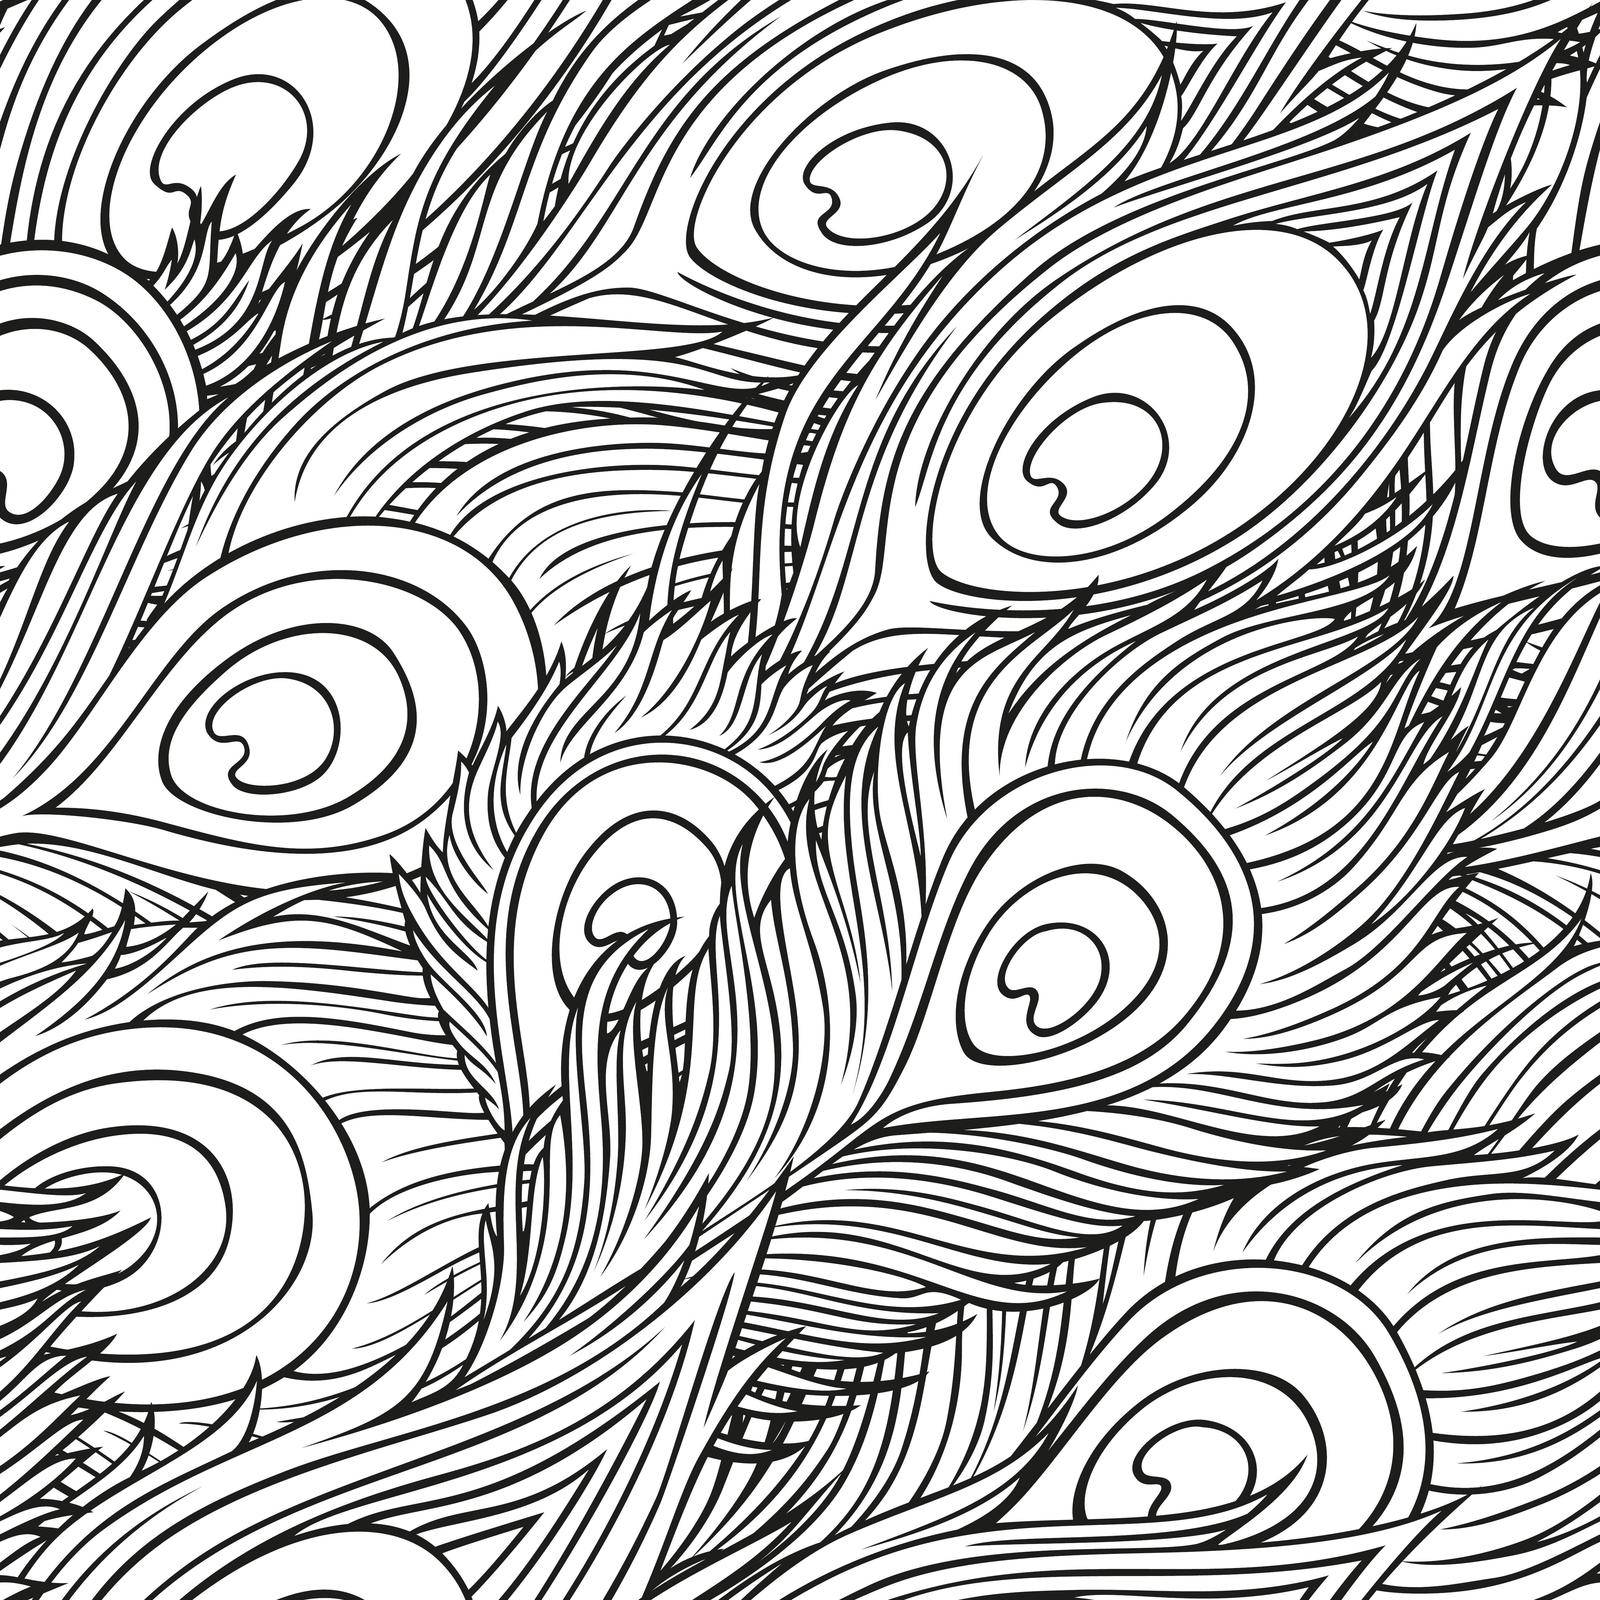 Vintage seamless pattern with hand-drawn peacock feathers